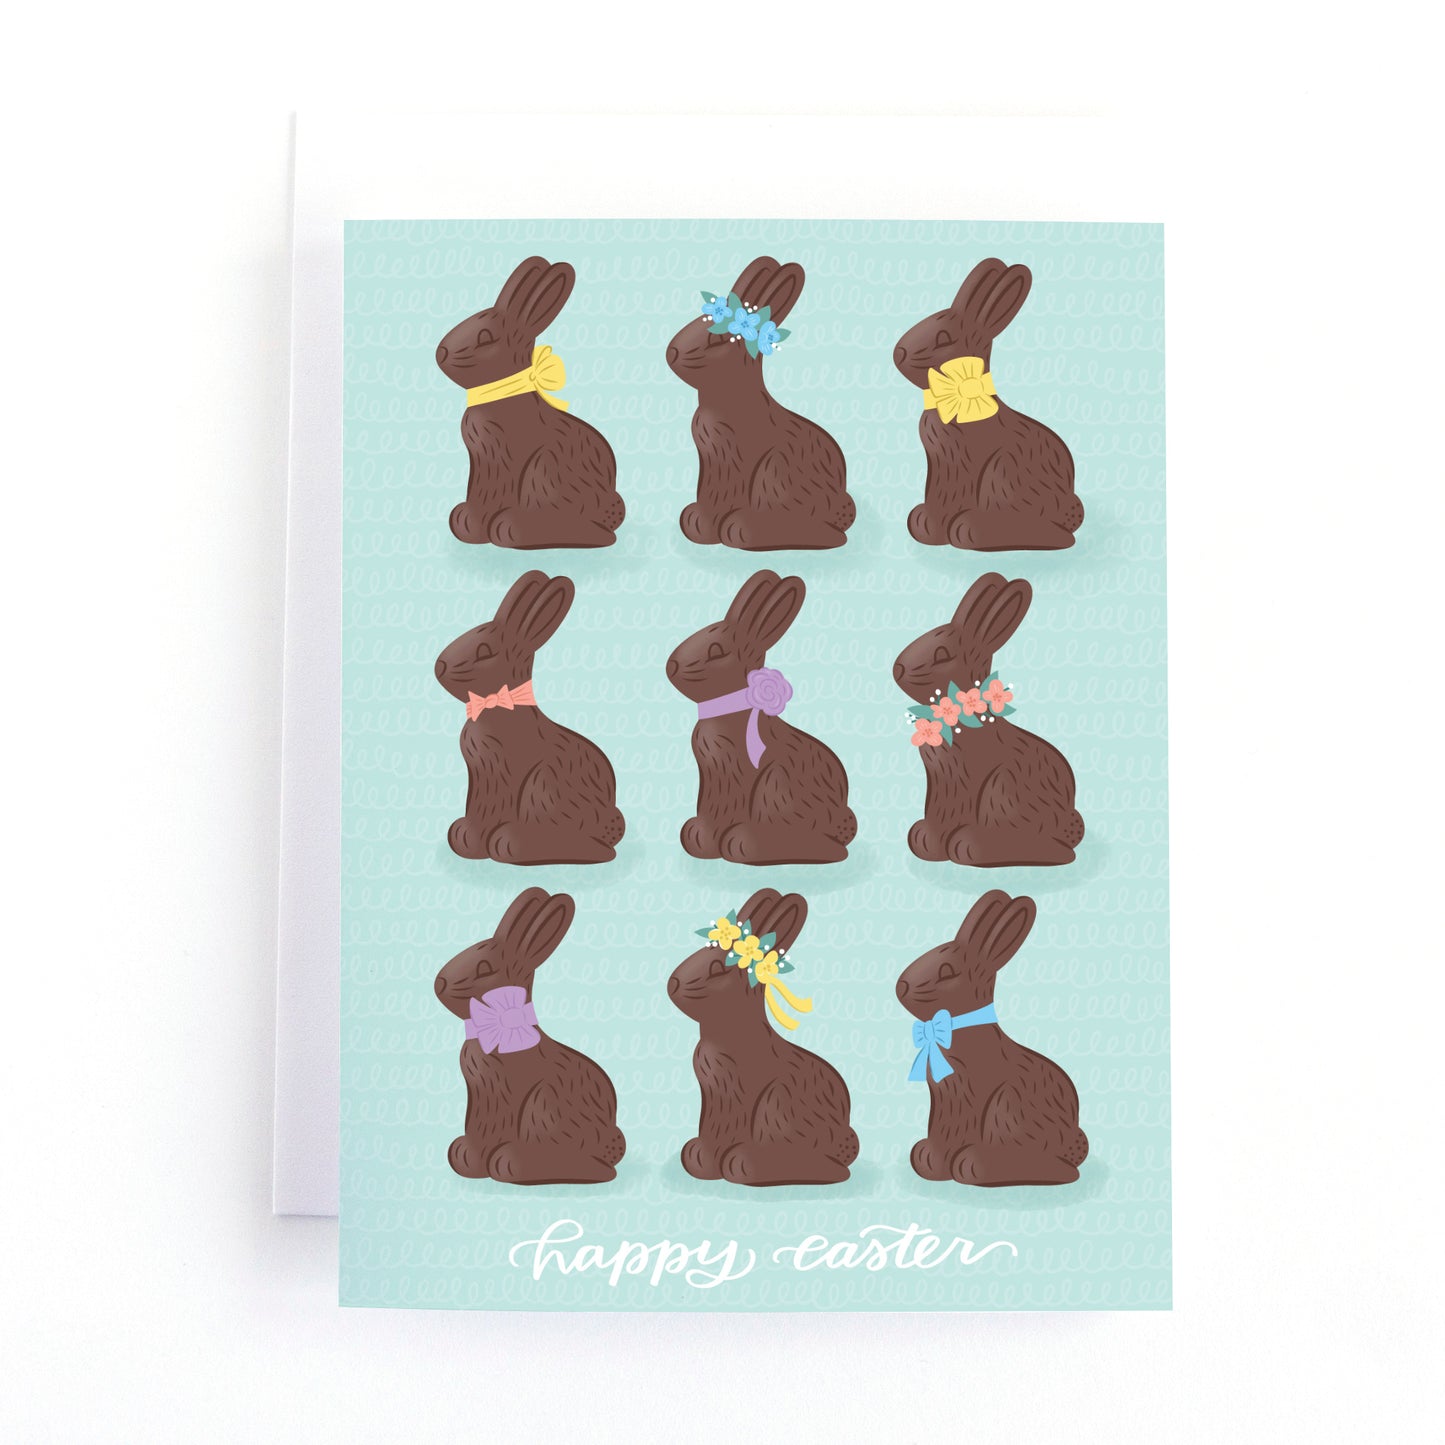 Easter card in modern pastels with illustrations of chocolate easter bunnies and the hand lettered greeting, happy easter